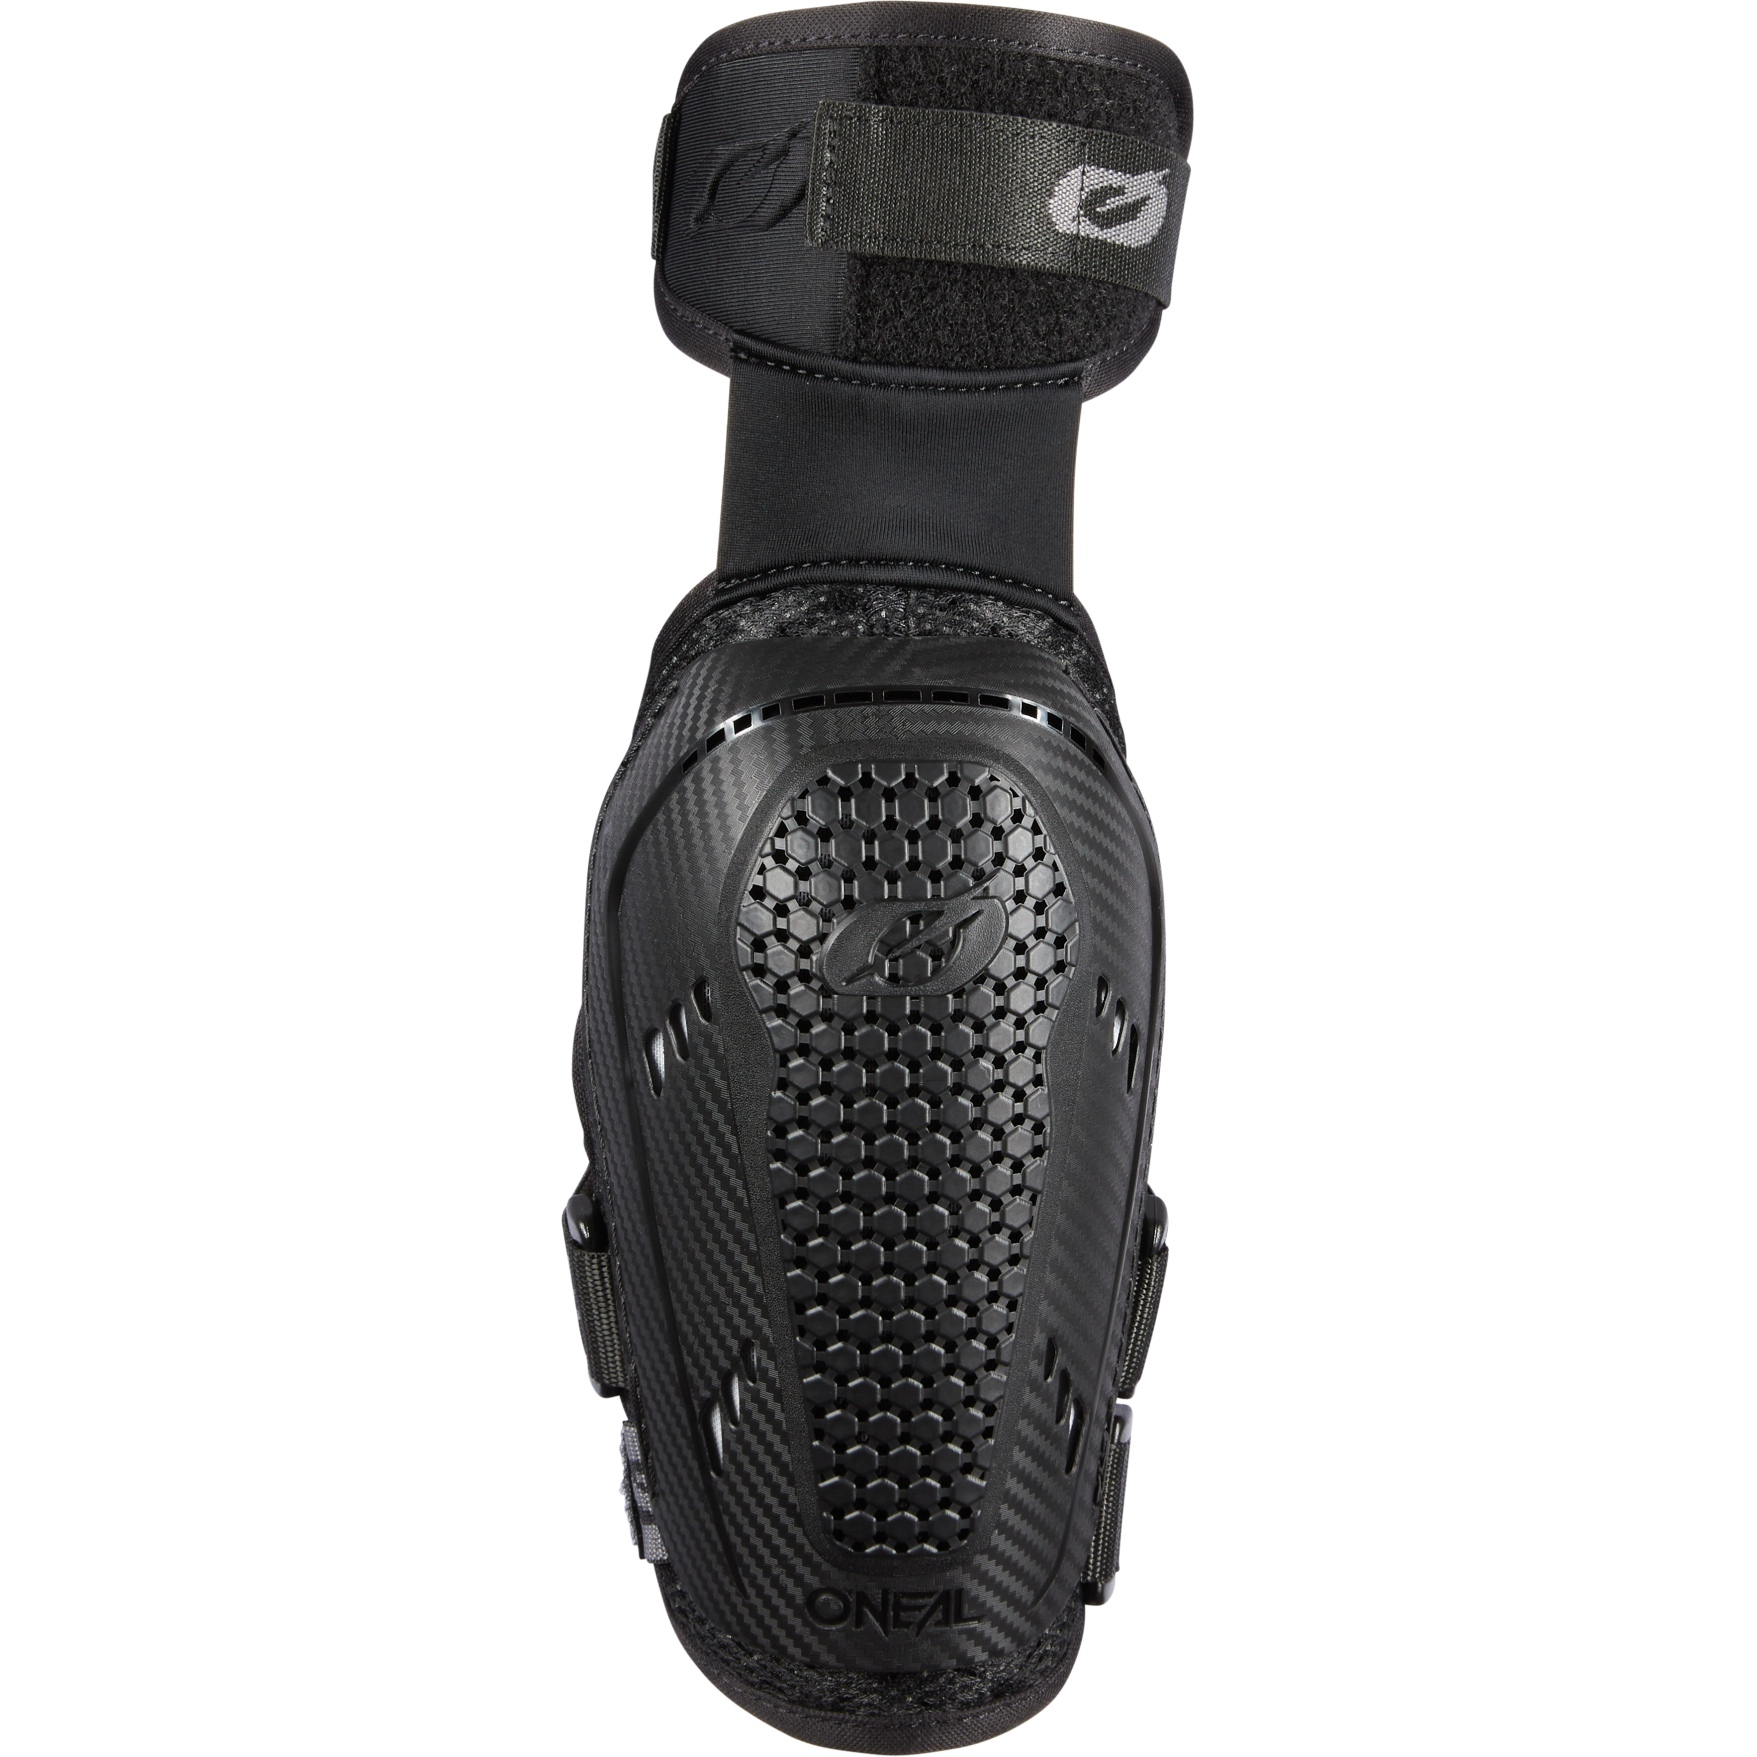 Image of O'Neal Pro III Youth Elbow Guard - V.23 black